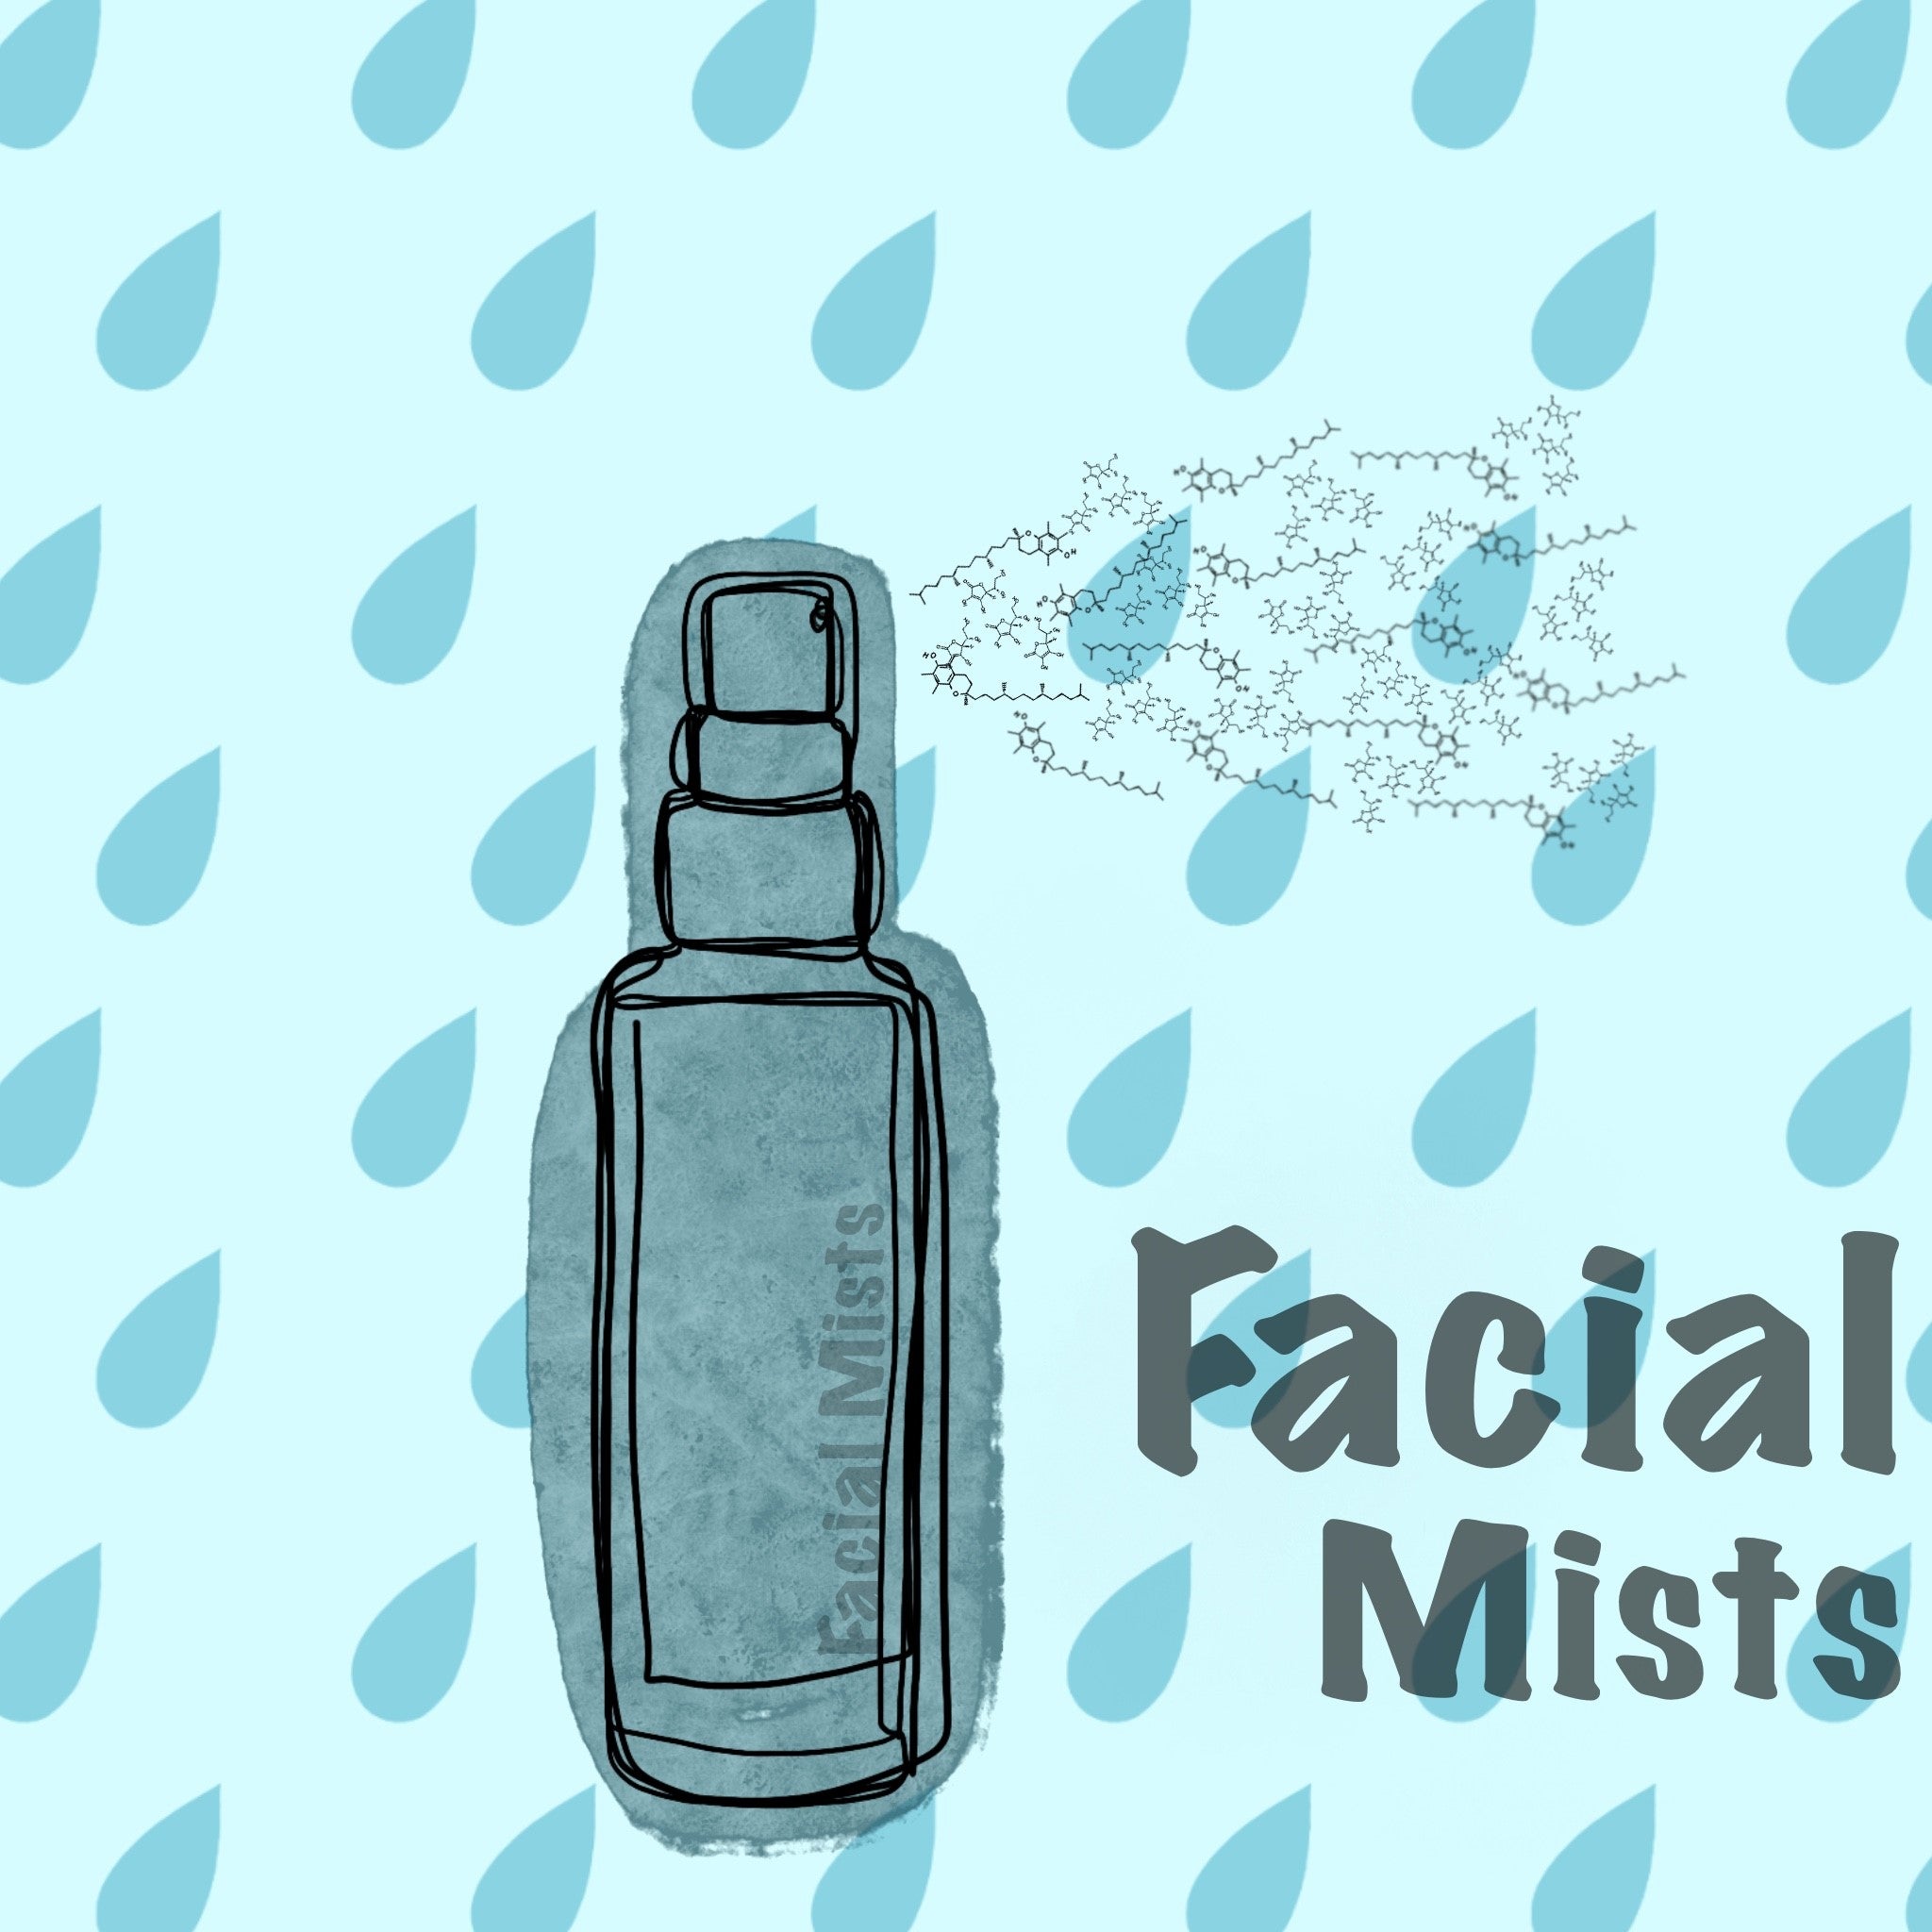 When To Use a Facial Mist